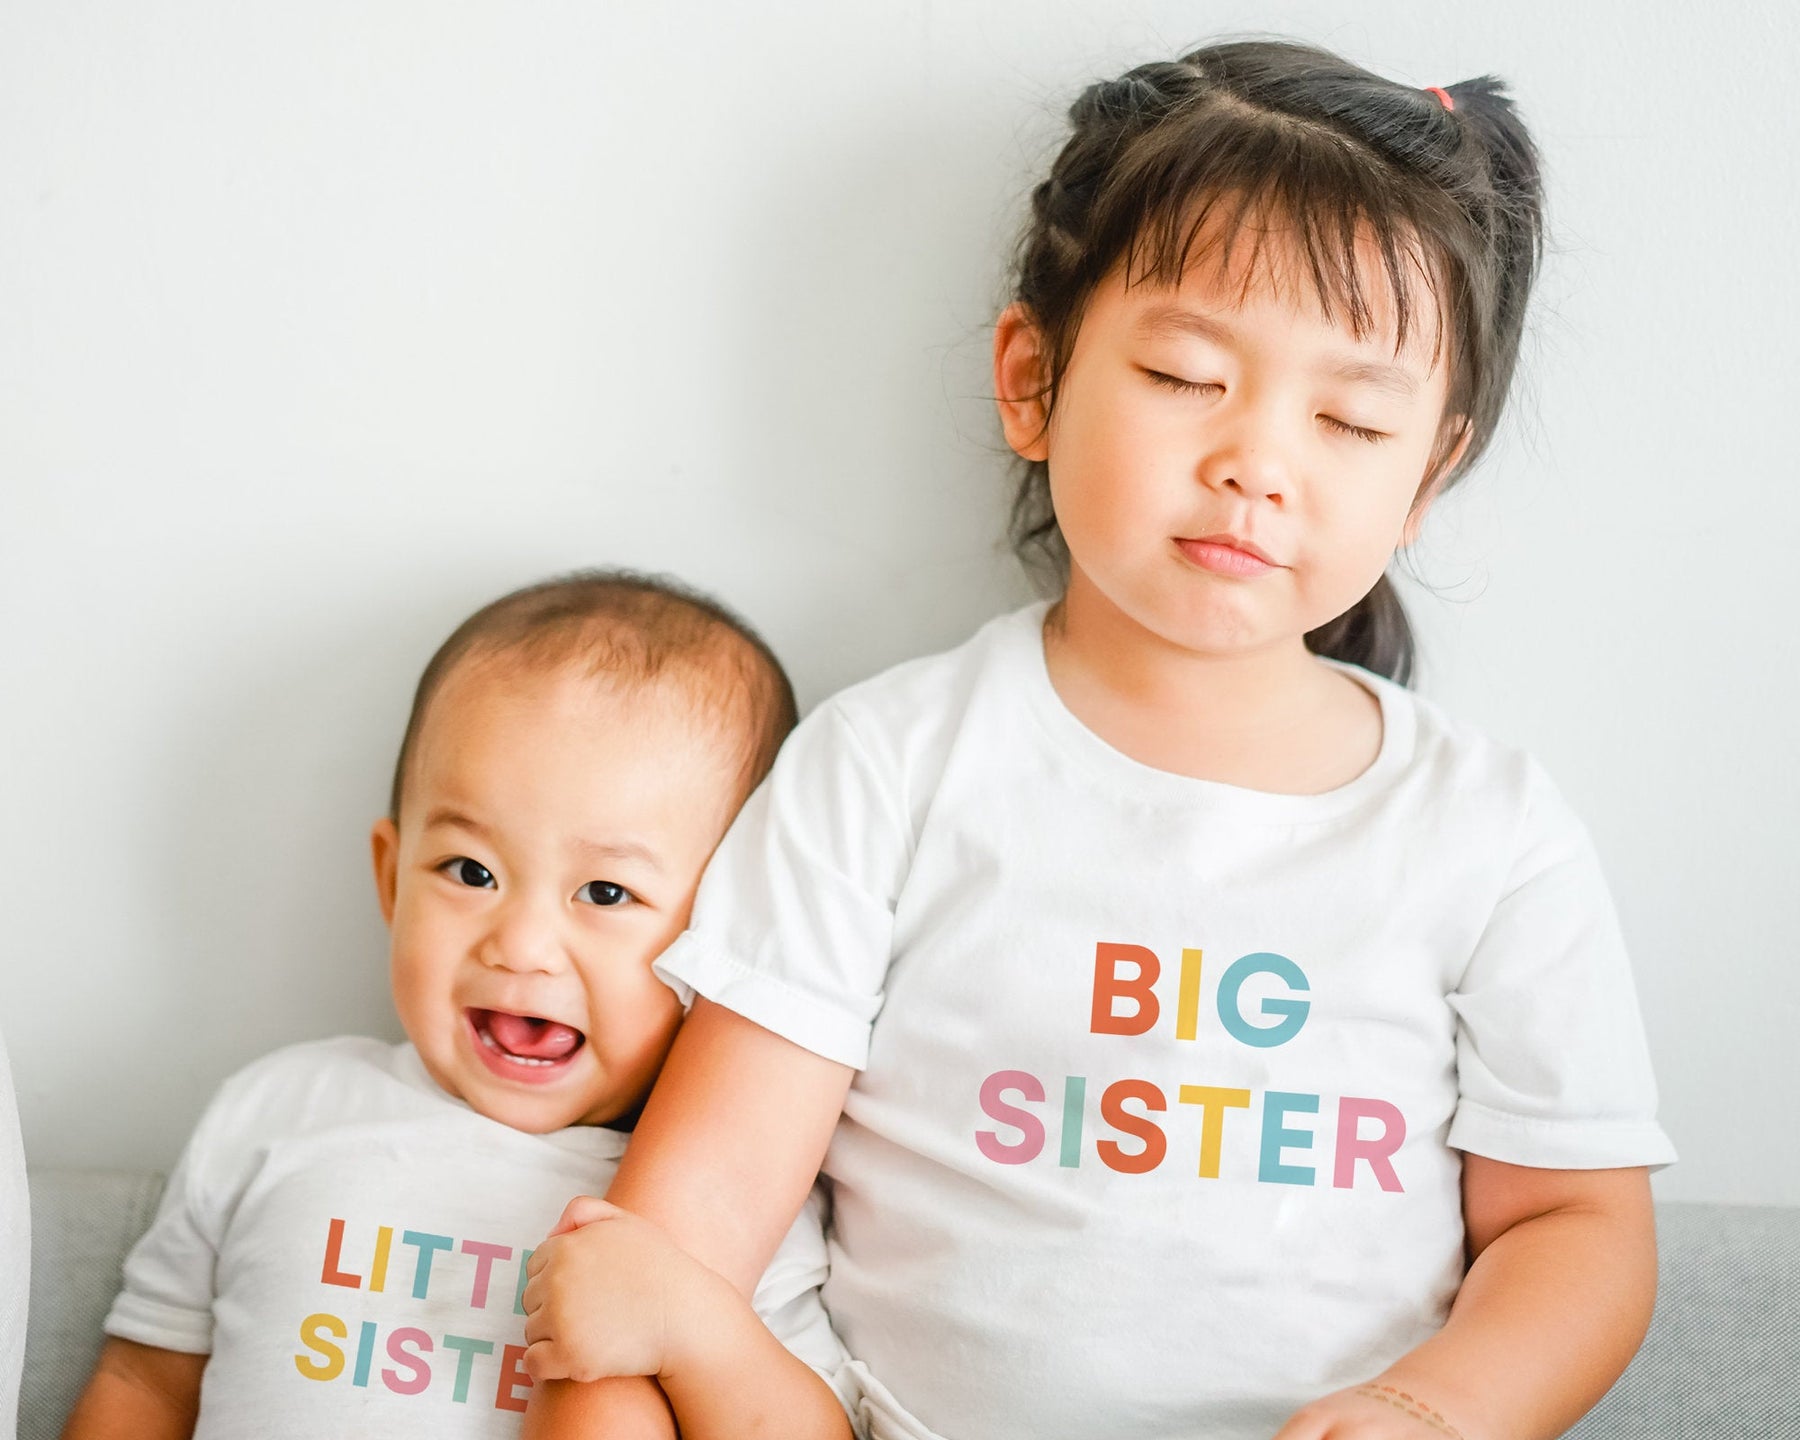 Big Sister / Little Sister Shirt – Milk and Cookies